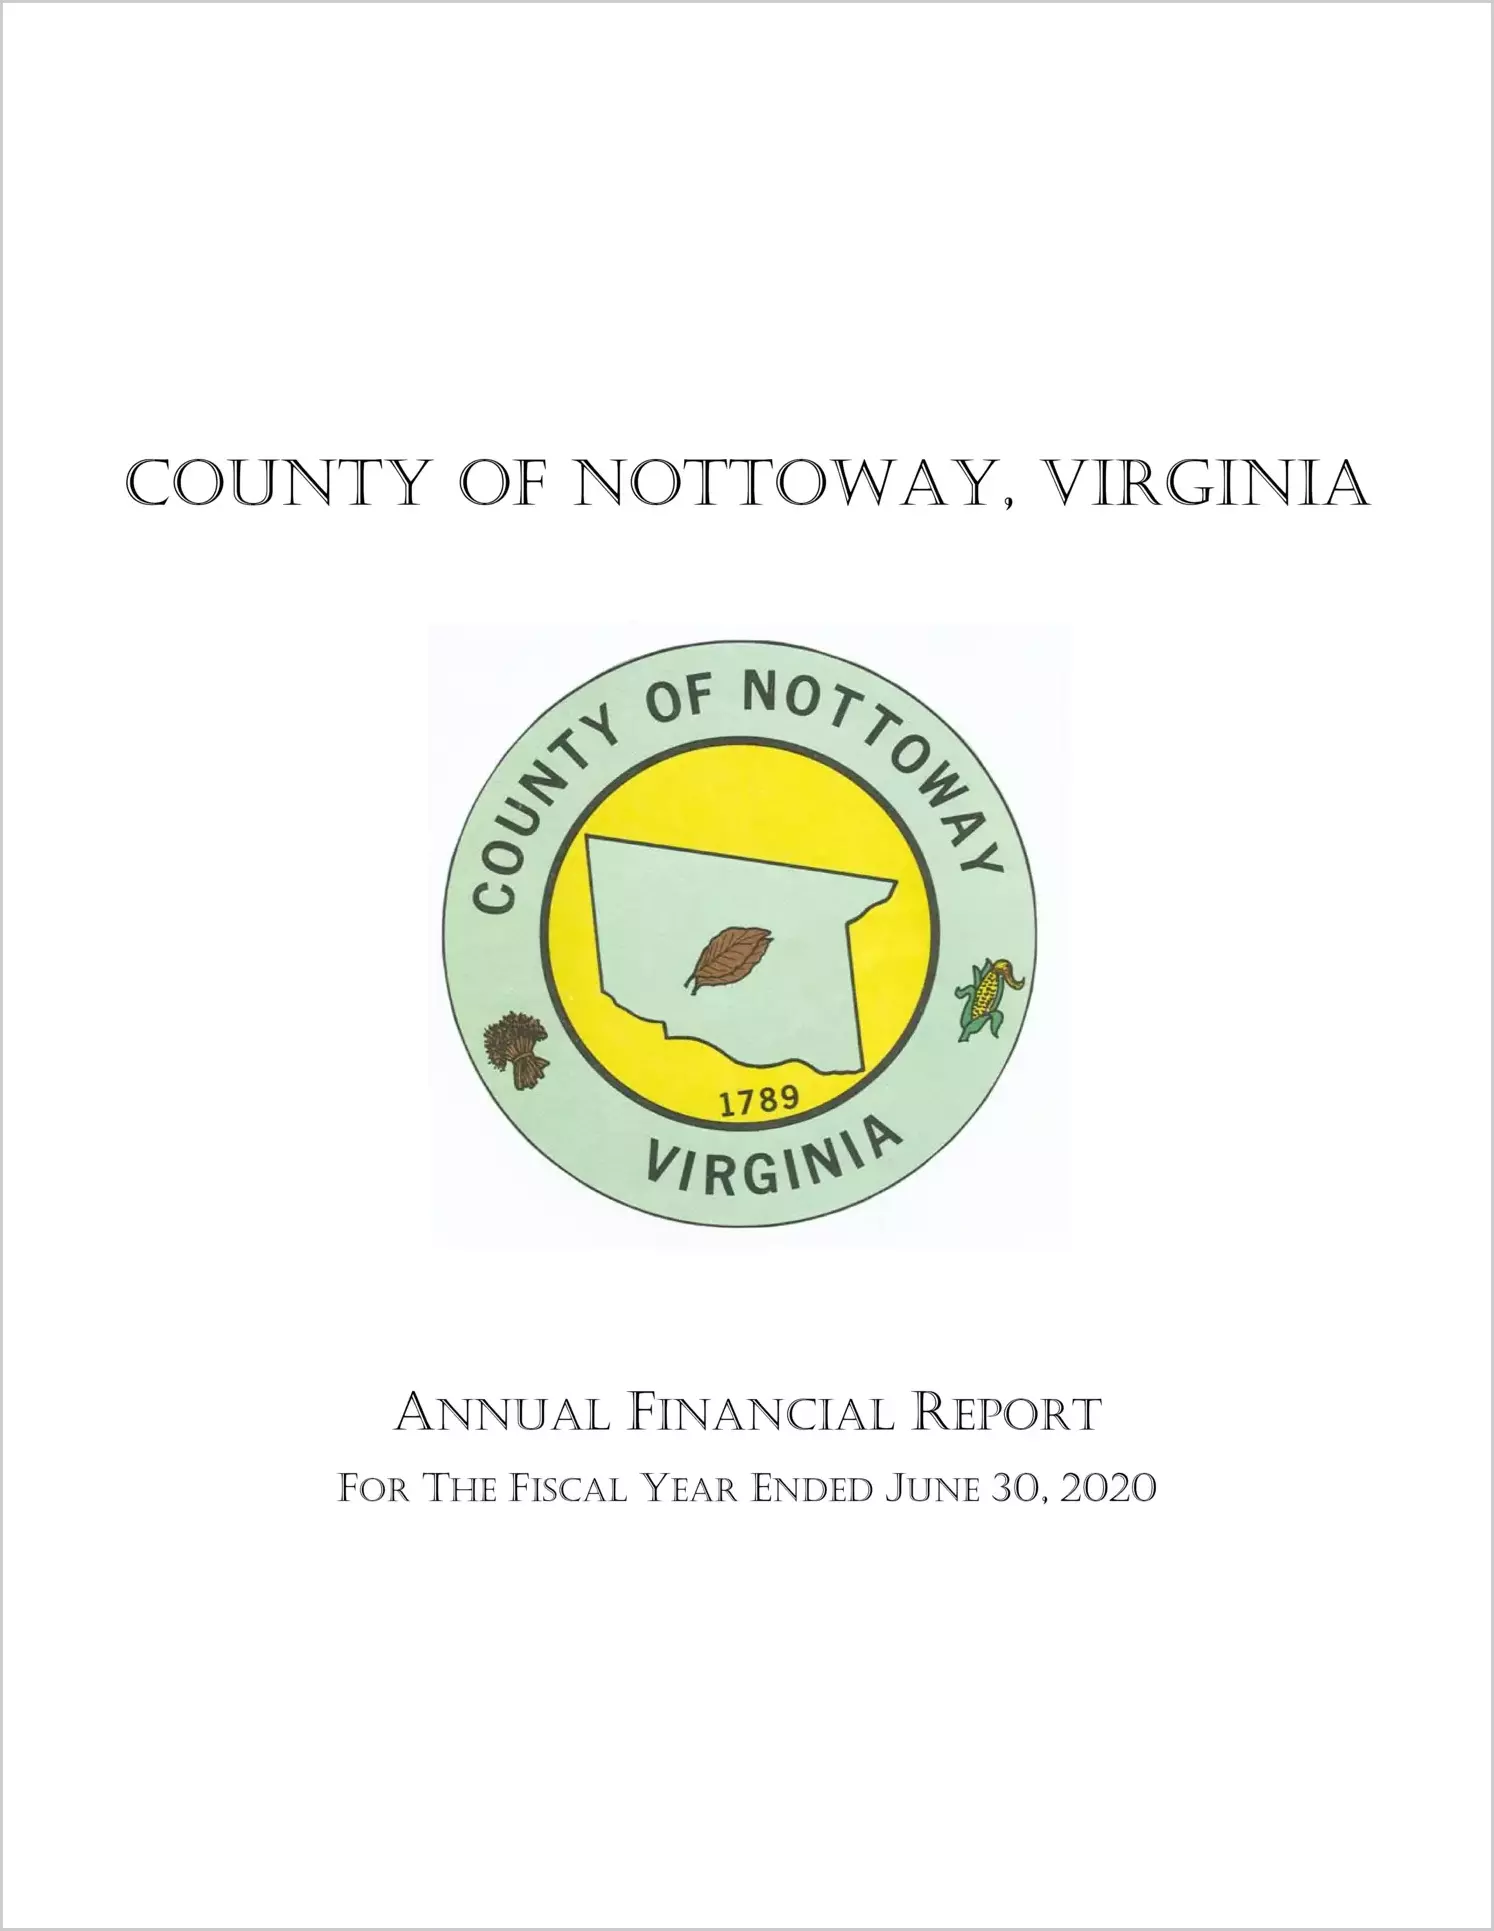 2020 Annual Financial Report for County of Nottoway